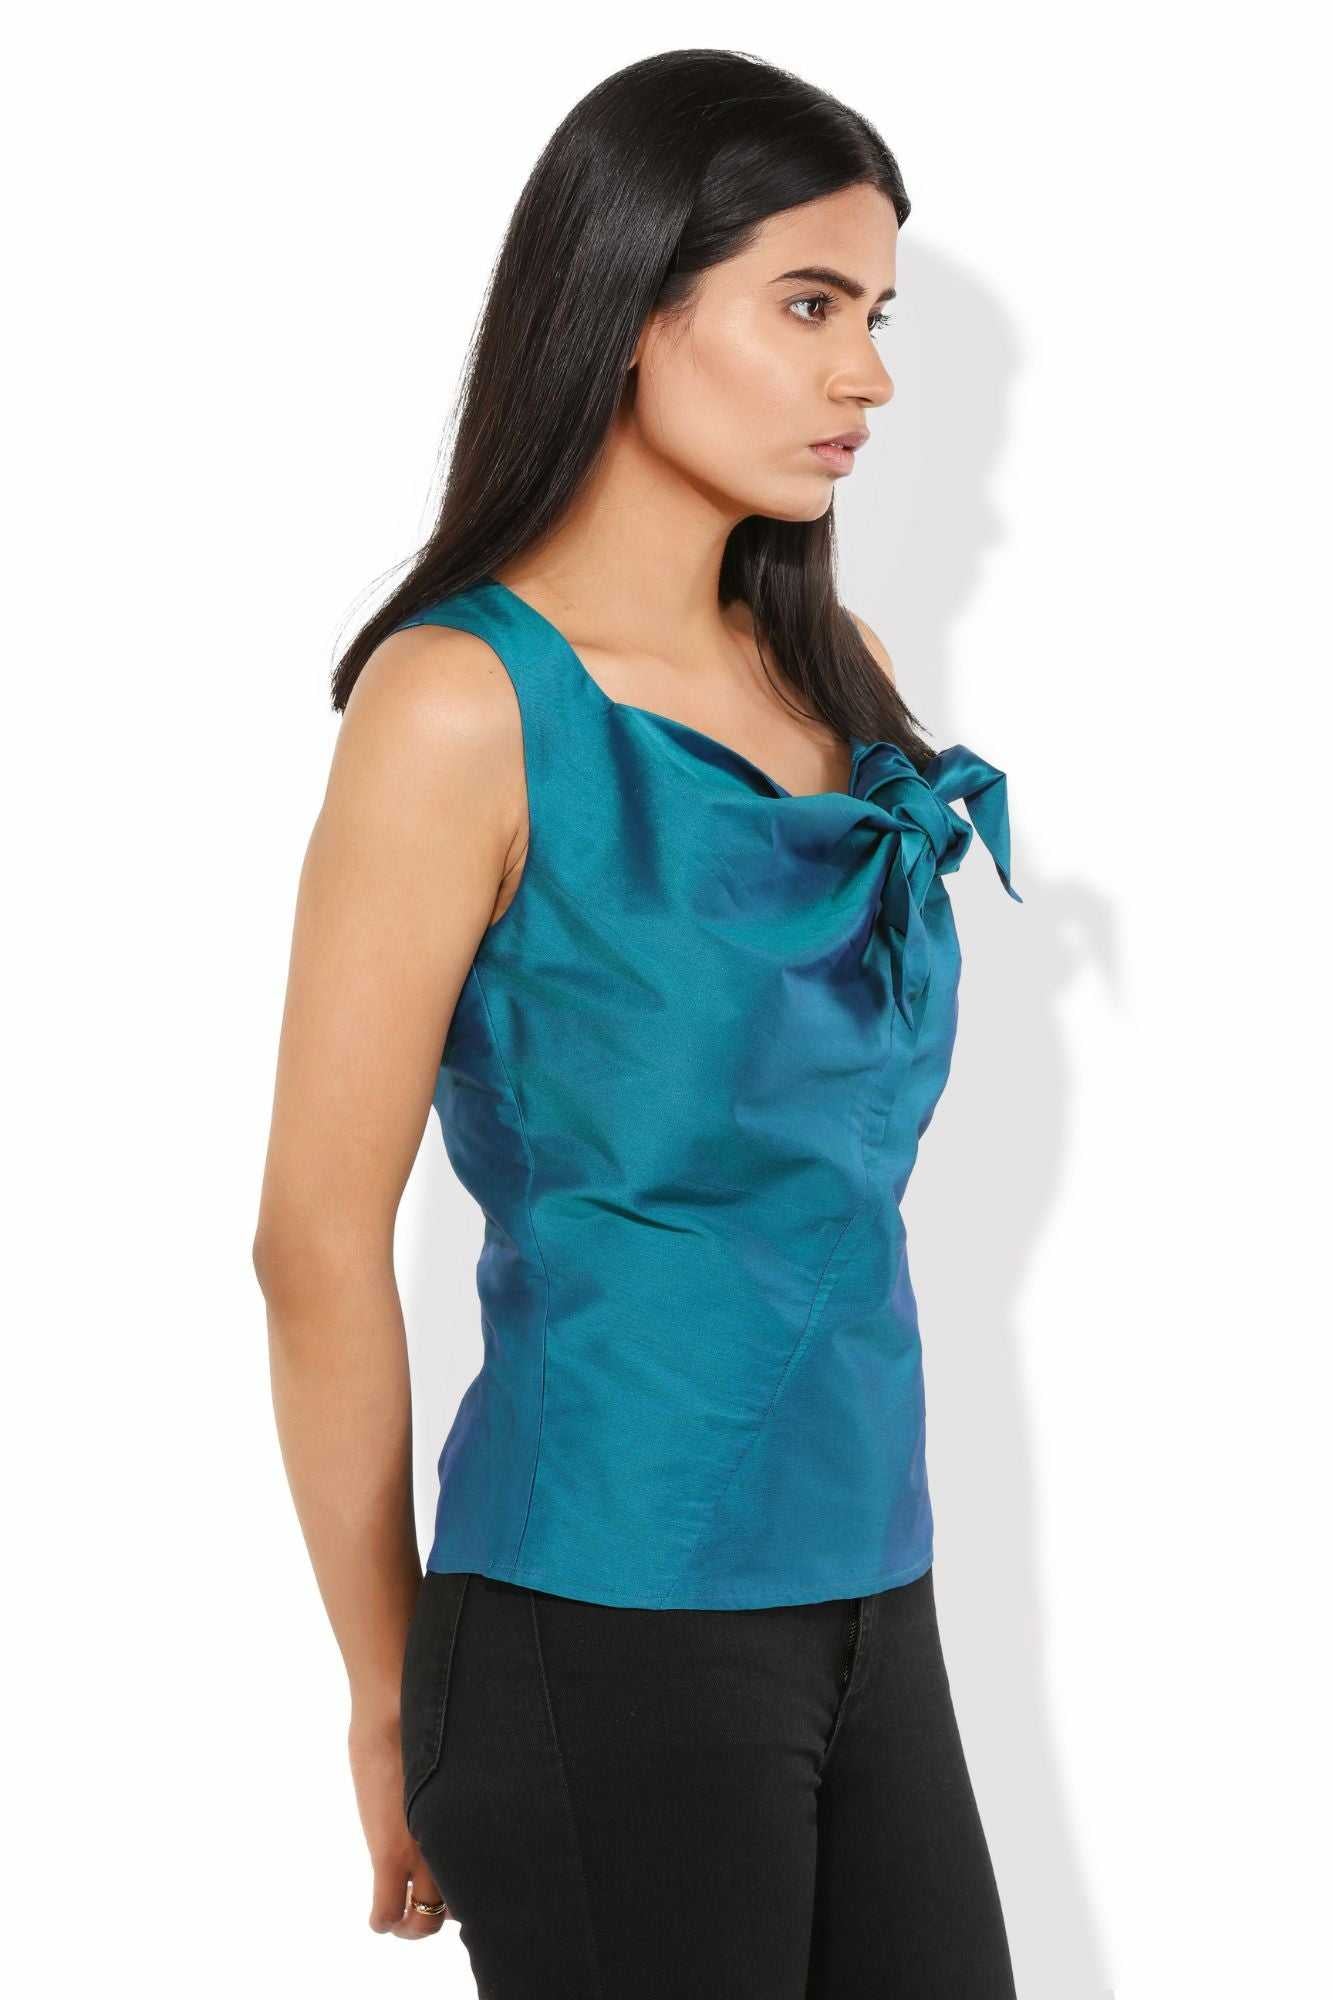 bowie knotted taffeta top